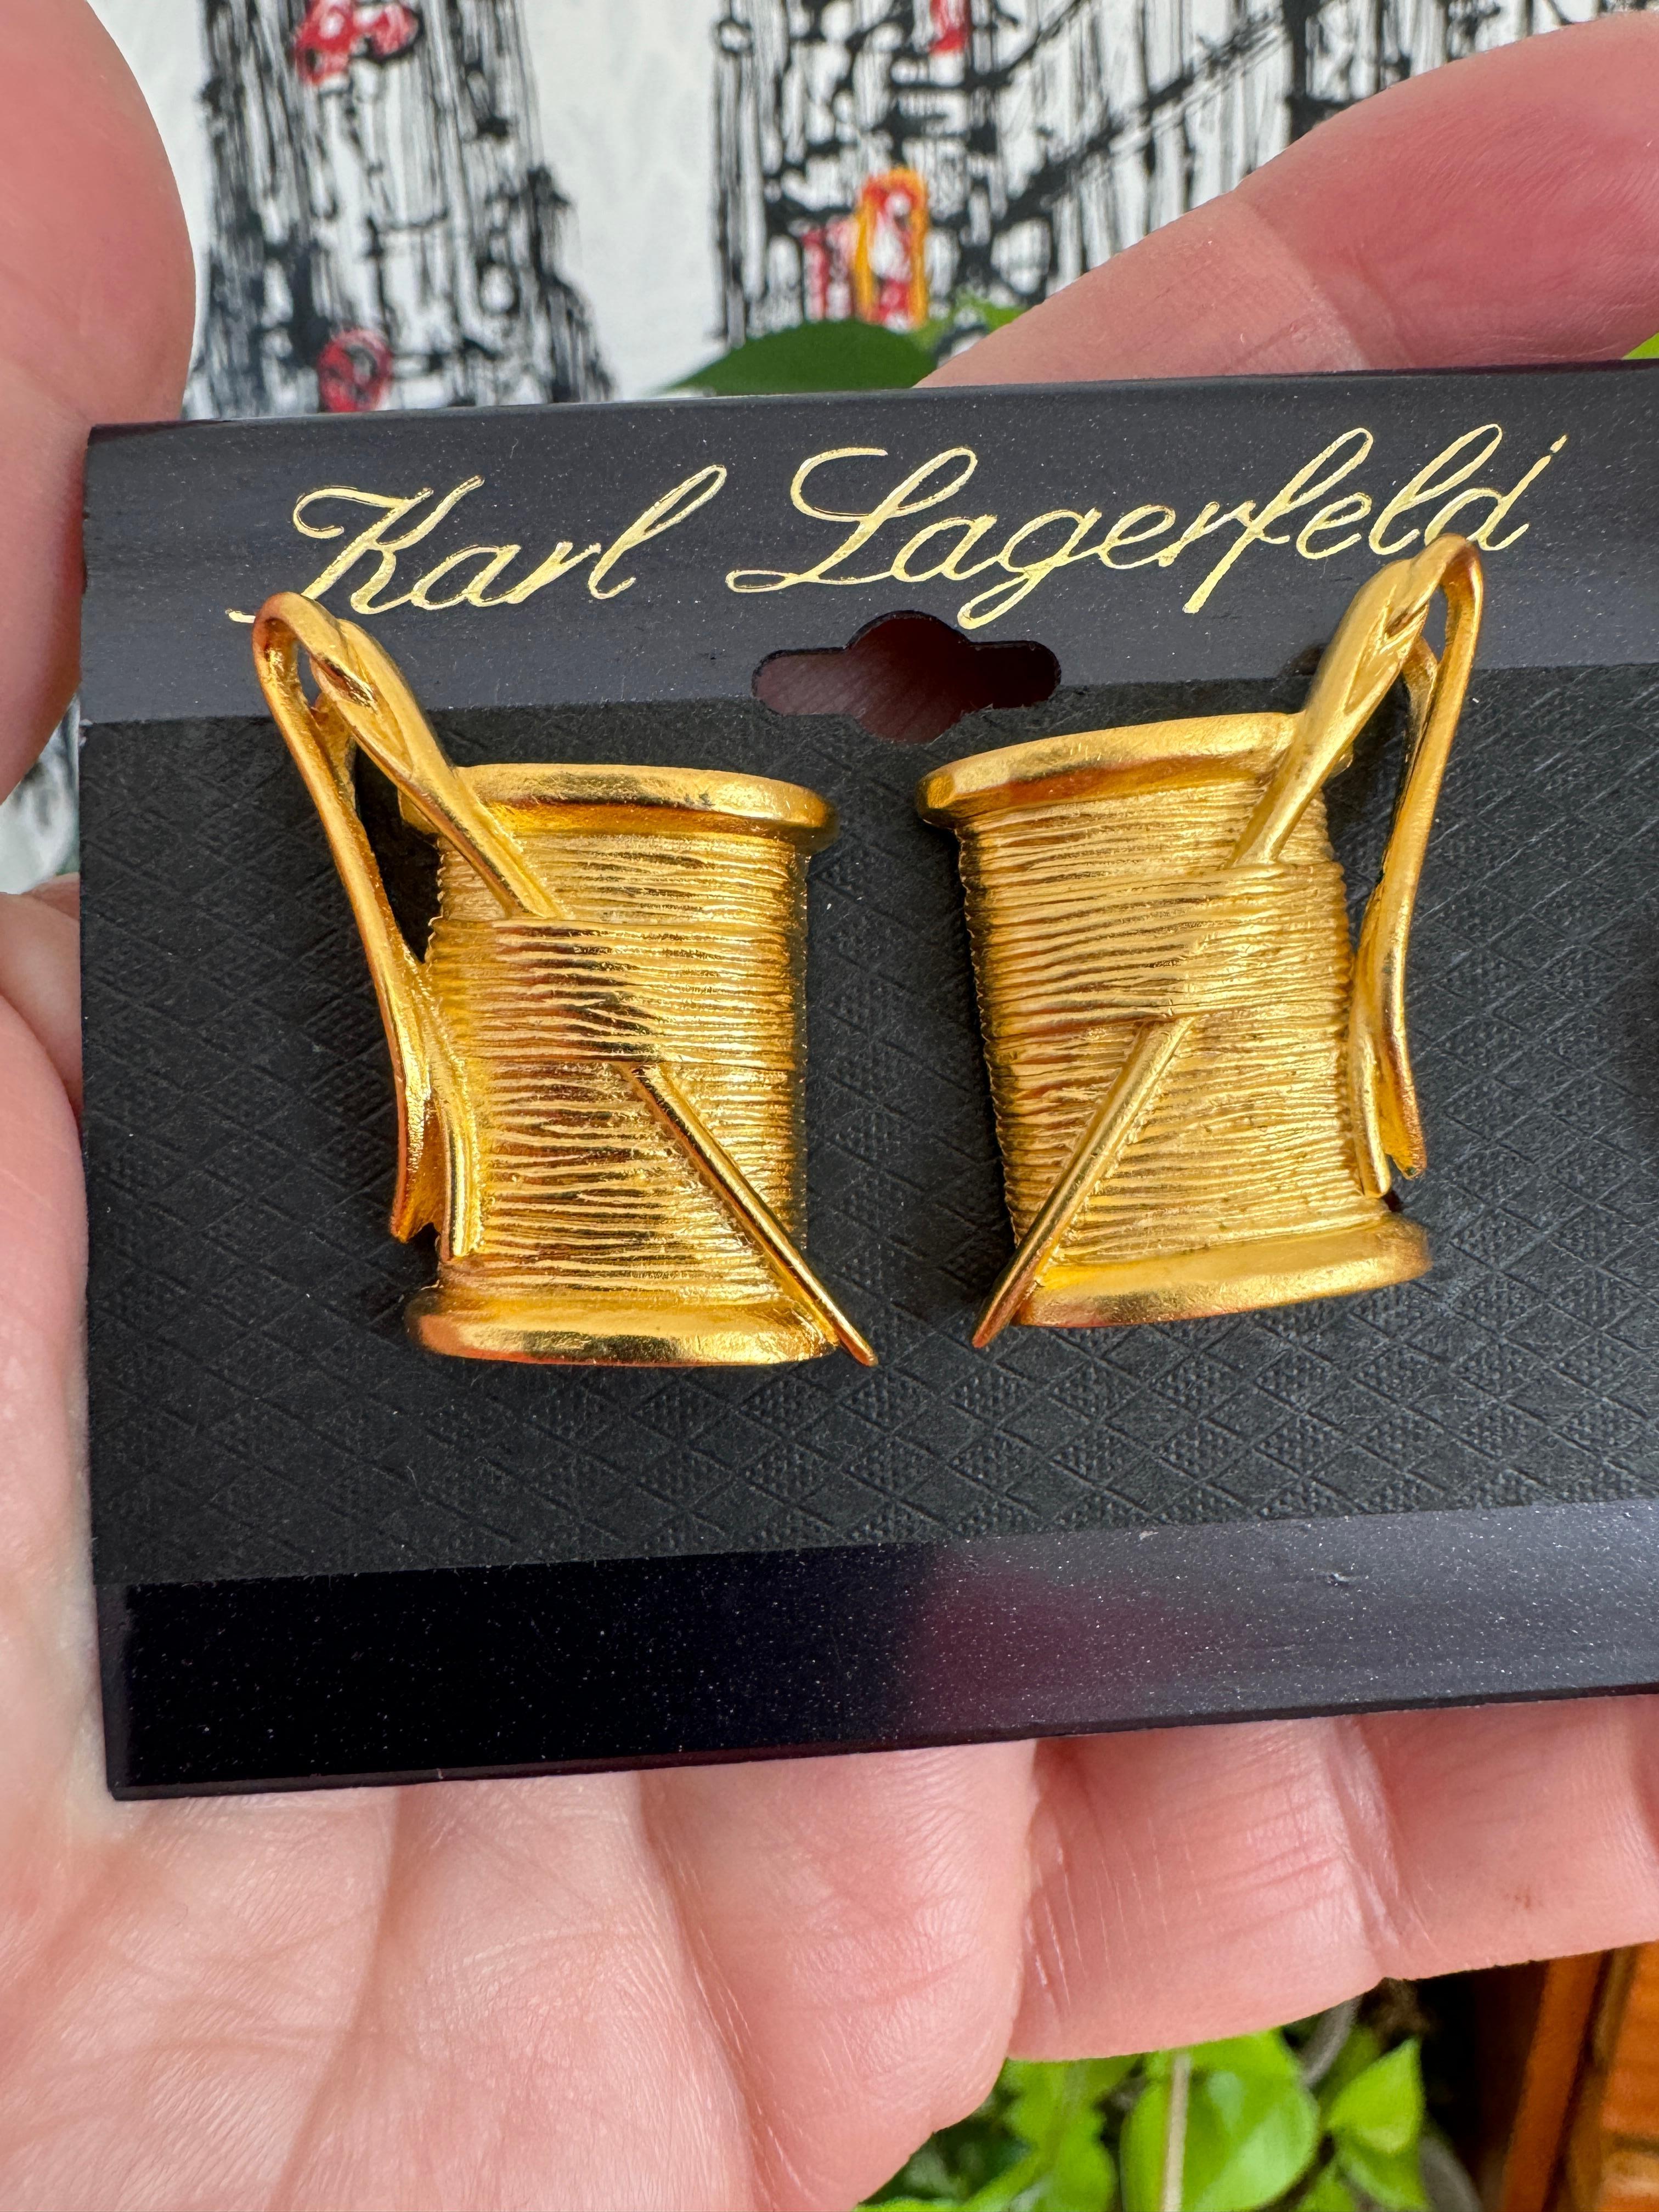 Pair of Lagerfeld Earrings, clips on's. Matching Brooch listed as well on our storefront. Earrings Measures 1.21 inch or 30.78mm top to bottom
.98 inches or  25.11mm at the widest. They are Still on the original earring card from Neiman Marcus. Tons